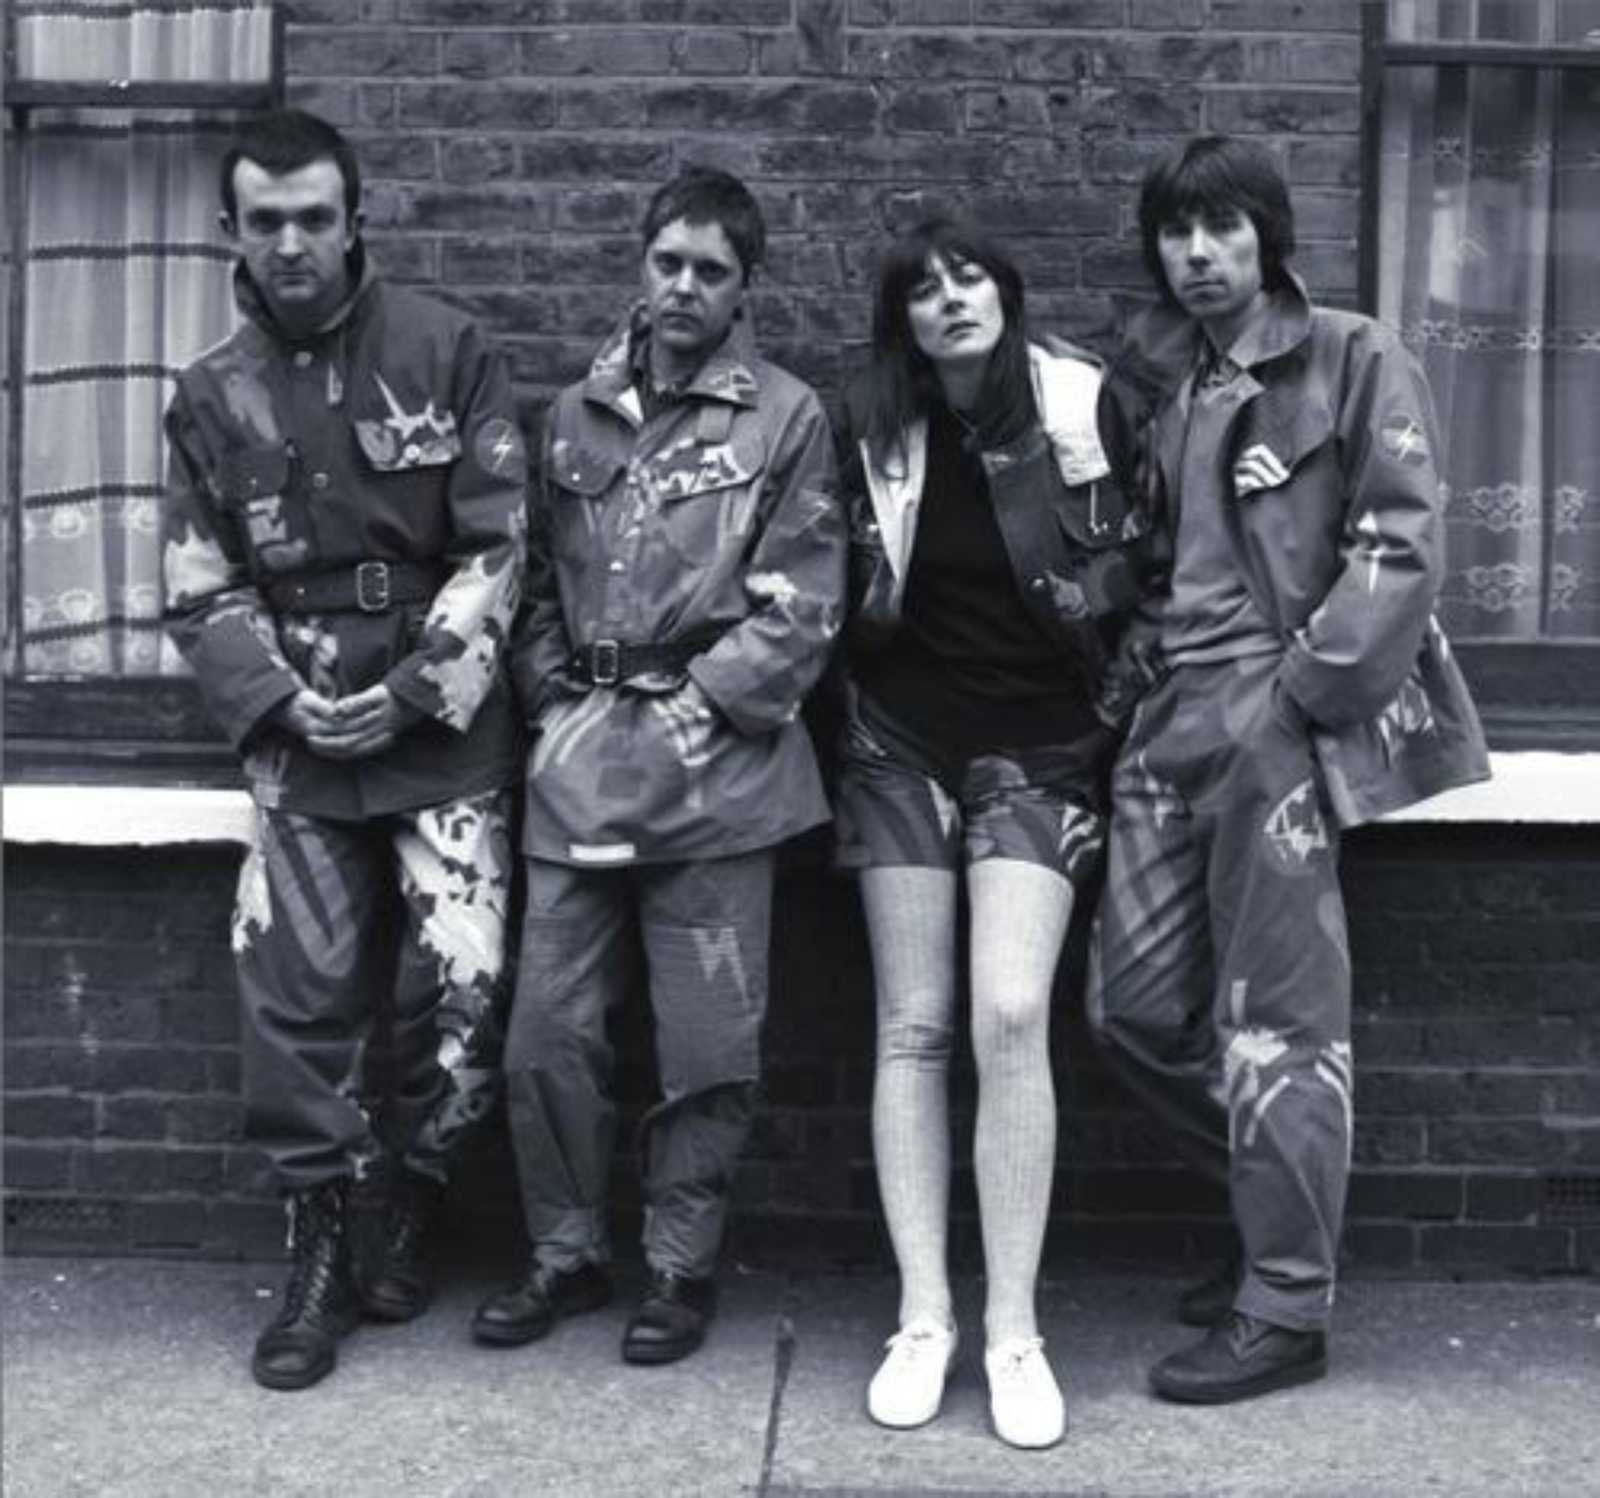 The Best Worst Band in the World? Alan Rider reports back on 'An Endless Discontent', a skilful dissection of the enigma that was Throbbing Gristle